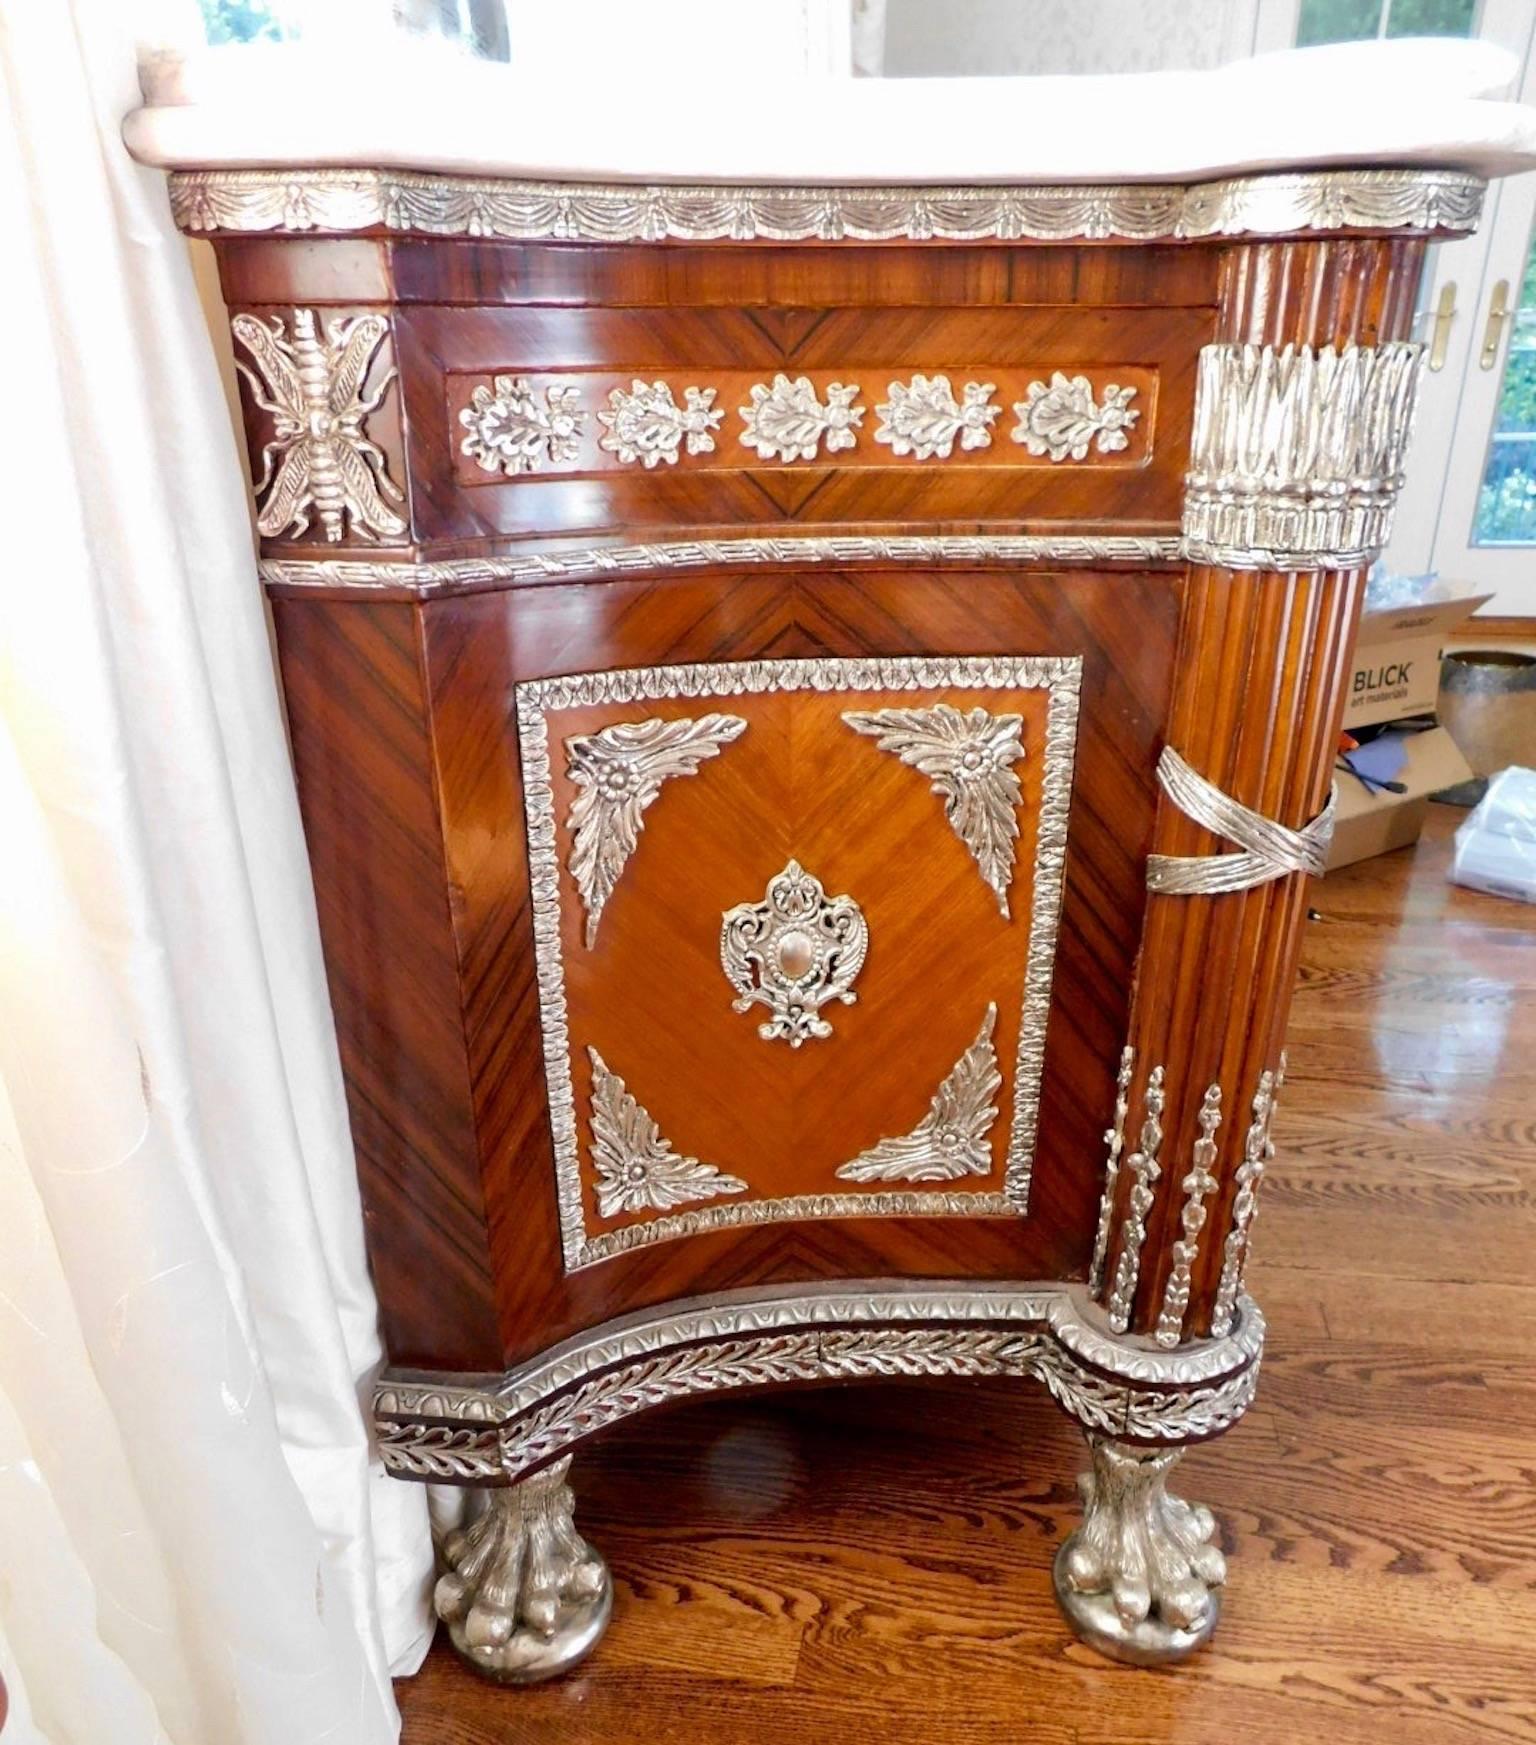 Revolution commode silver plated with marble top.